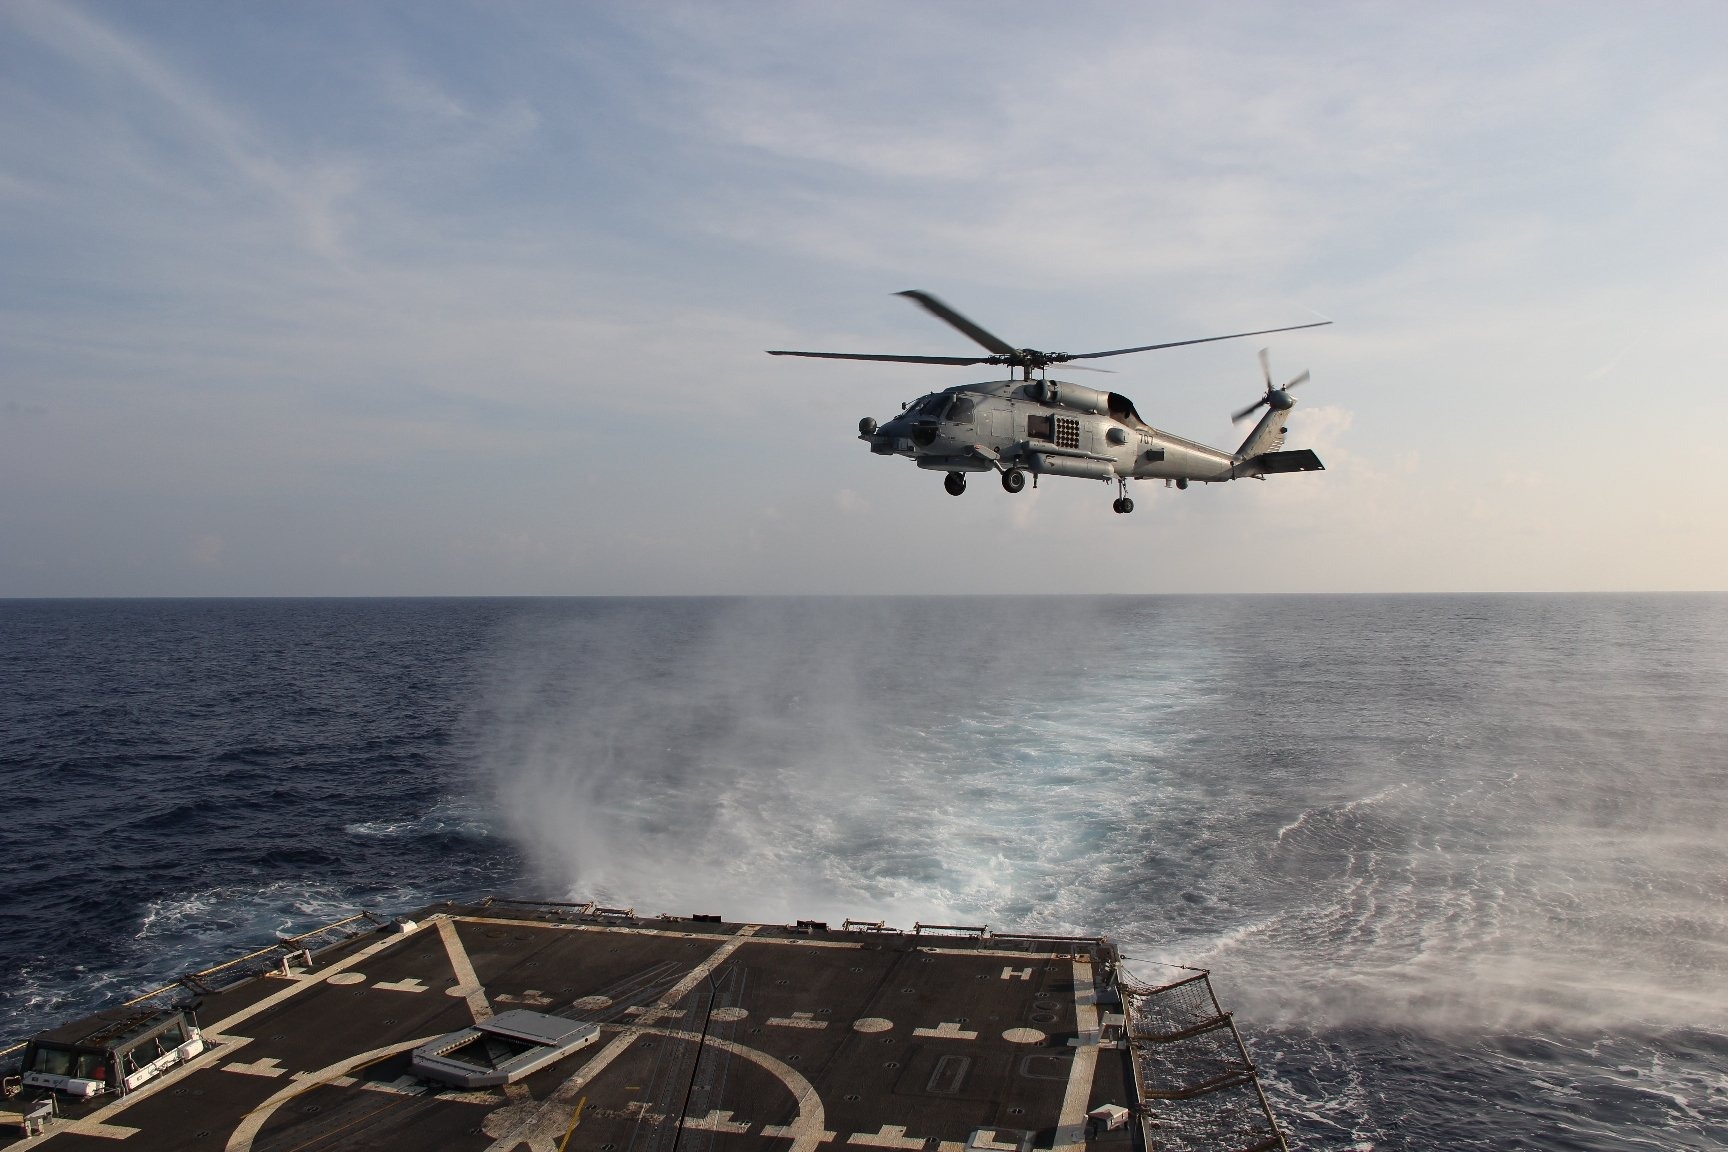 A Sea Hawk helicopter departs from the U.S.S. <i>Pinckney</i> to search for the missing Malaysia Airlines aircraft on March 9, 2014 (U.S. Navy/ZUMA Press)